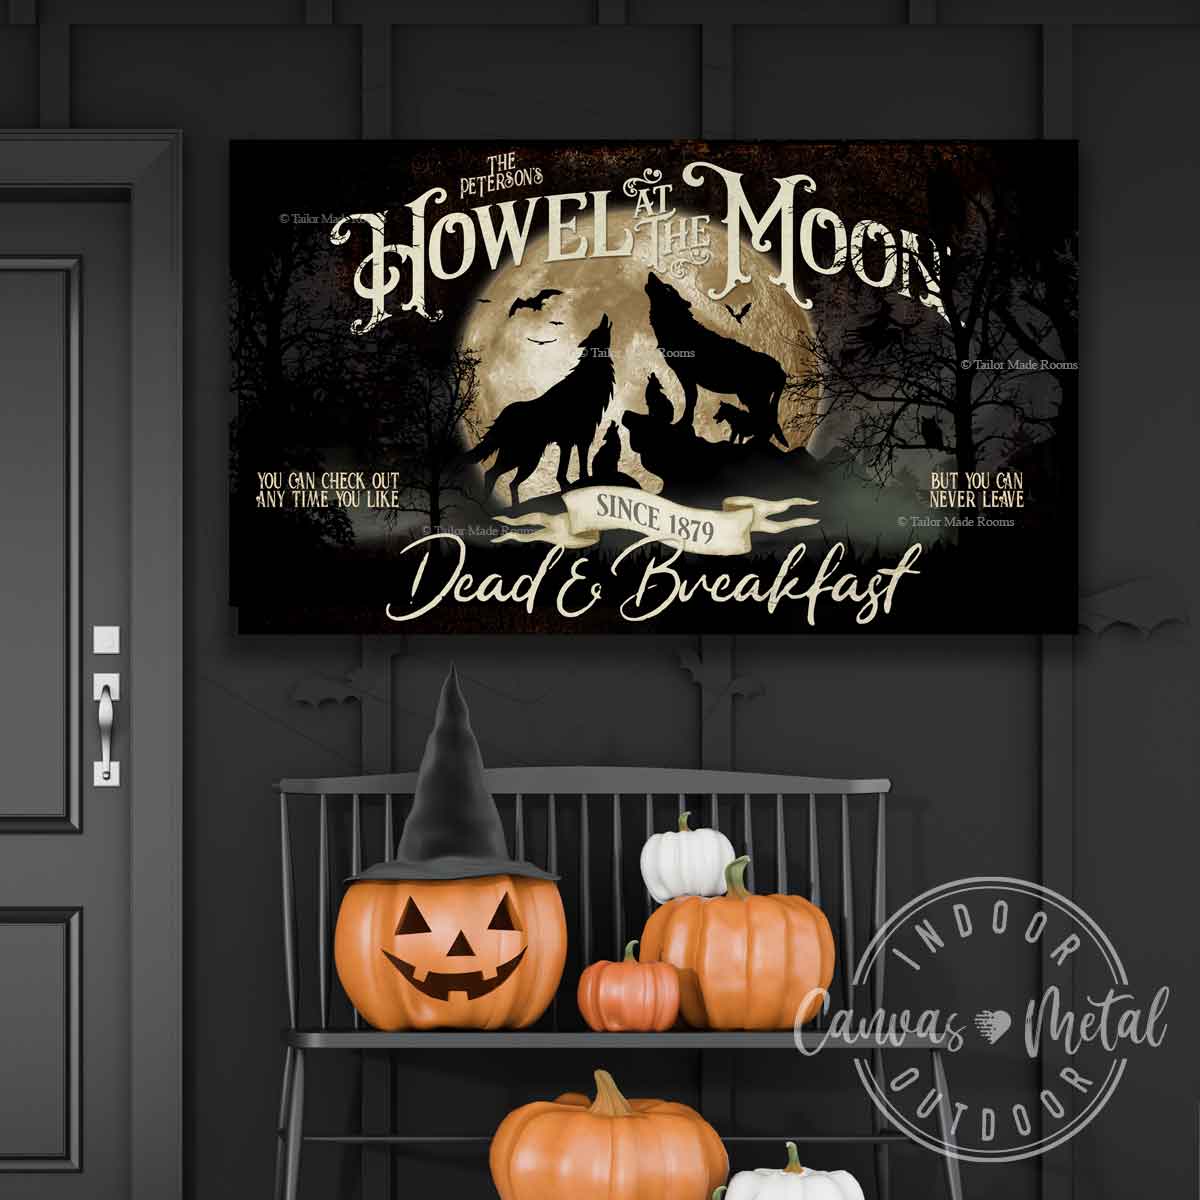 Wicked Witch Halloween sign of wolves in the moolight howling. Words say: Family name, Howel and the moon, Dead and breakfast, since 1879